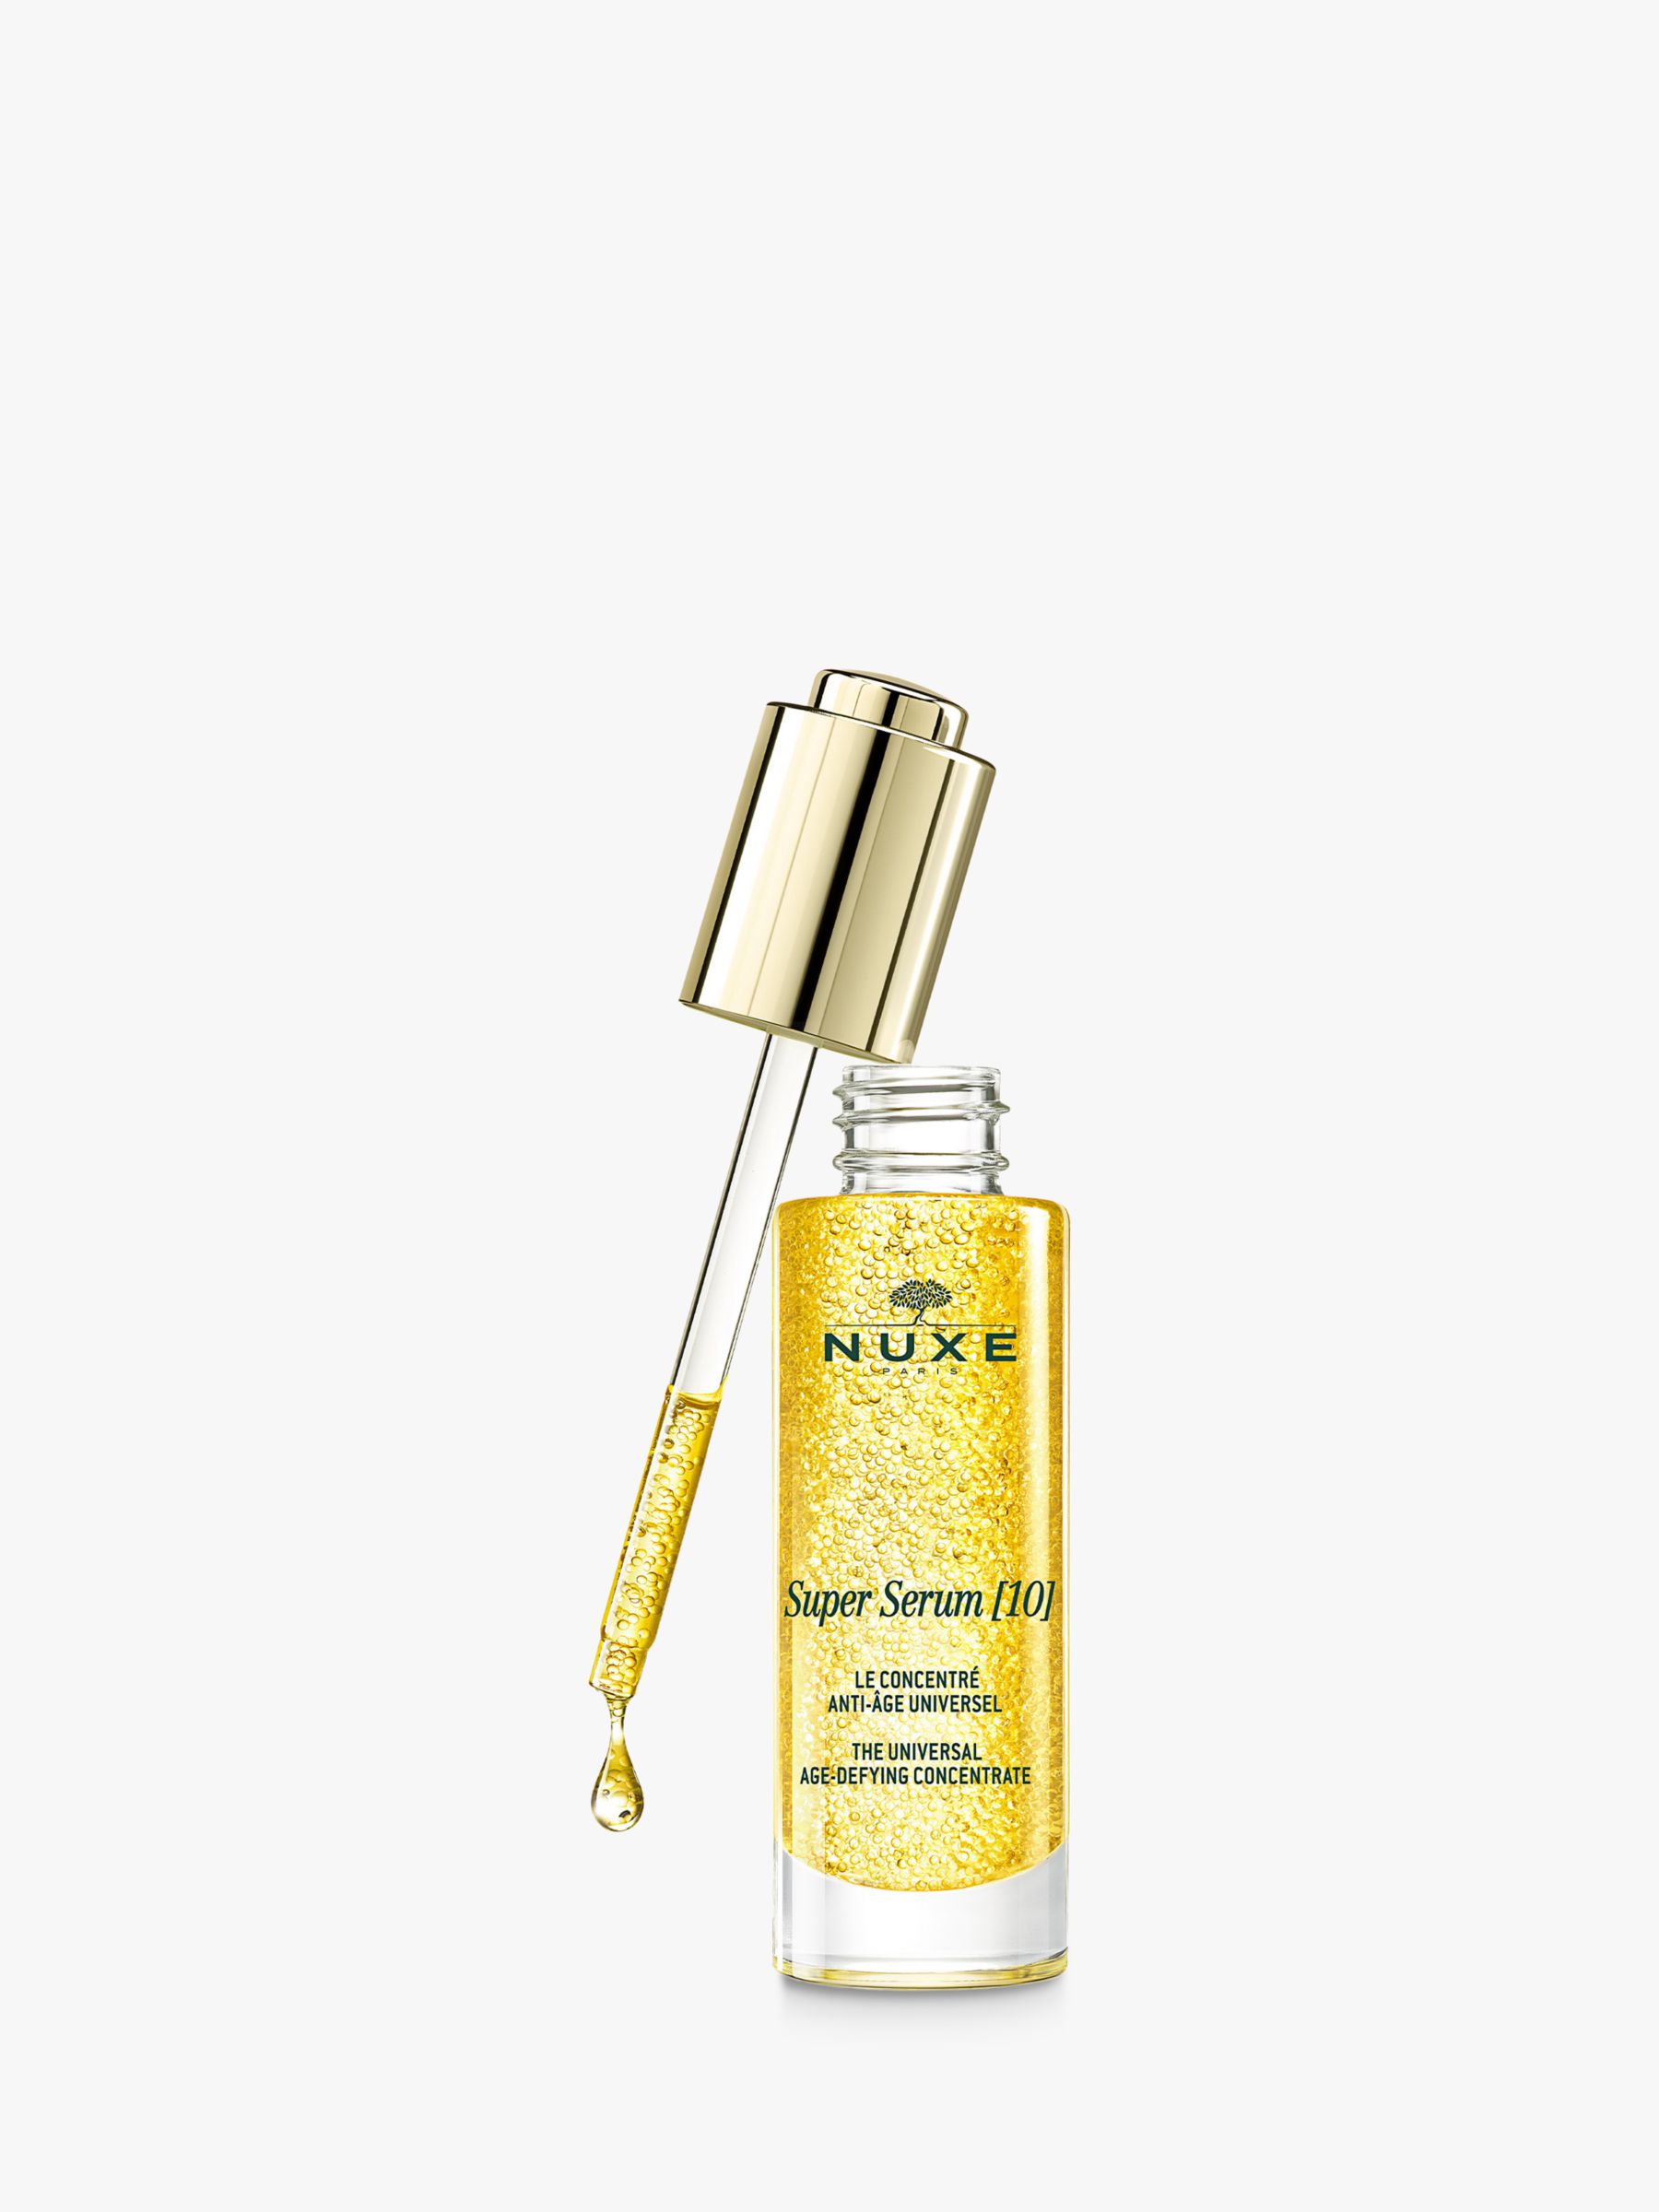 NUXE Super Super Serum (10) The Universal Anti-Ageing Concentrate, 30ml 2